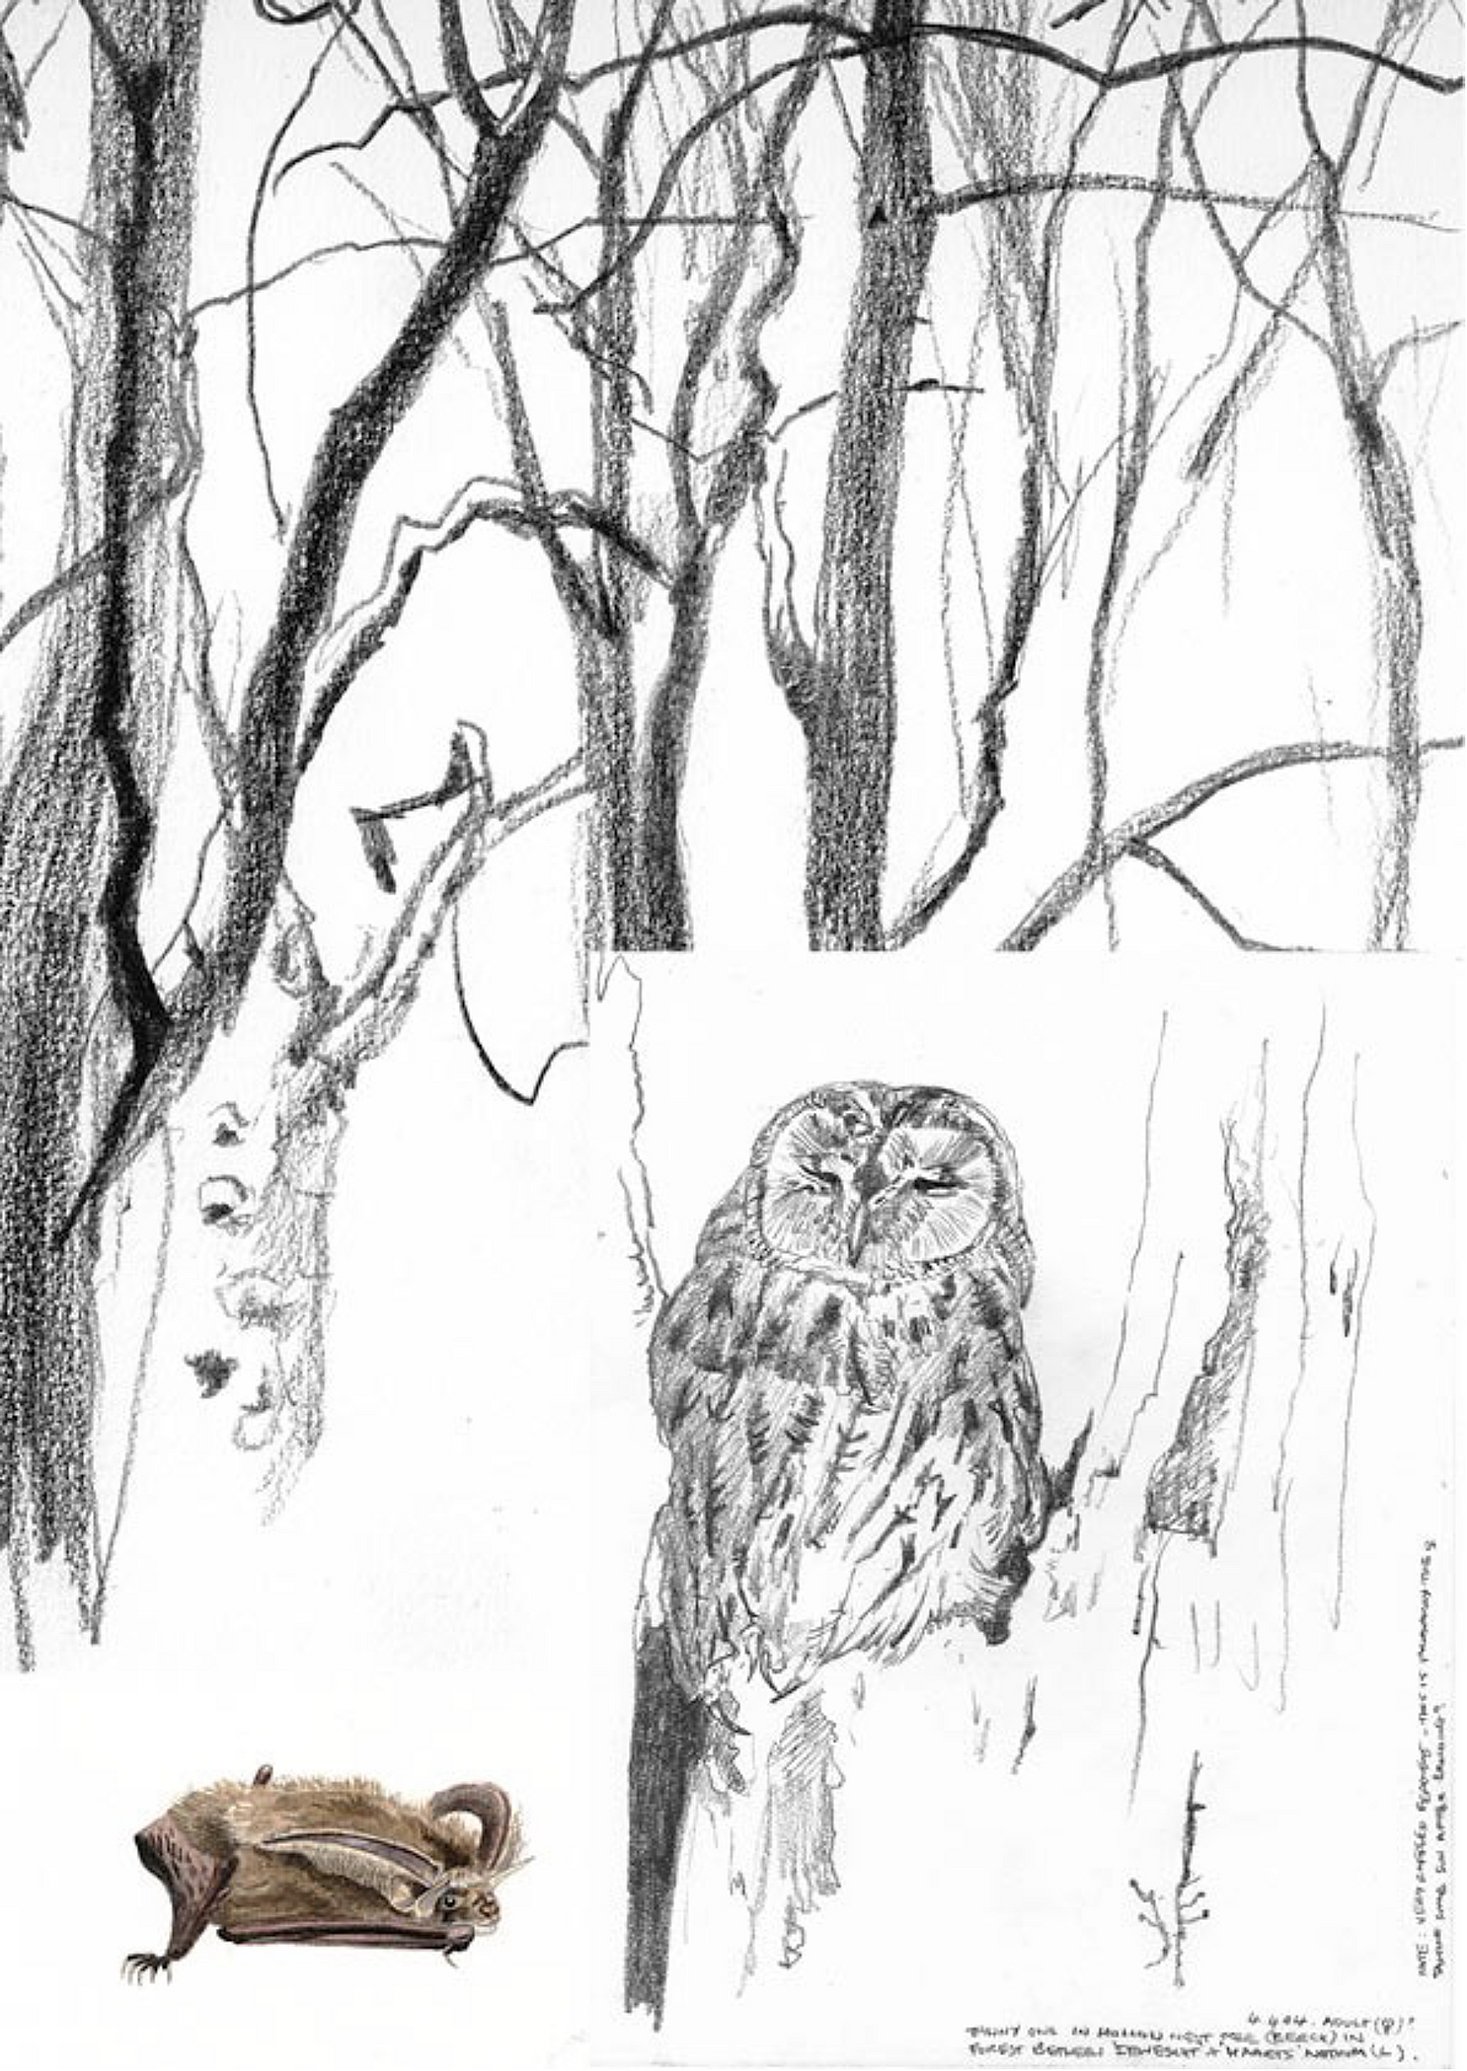 Of Owls, Bats and Trees